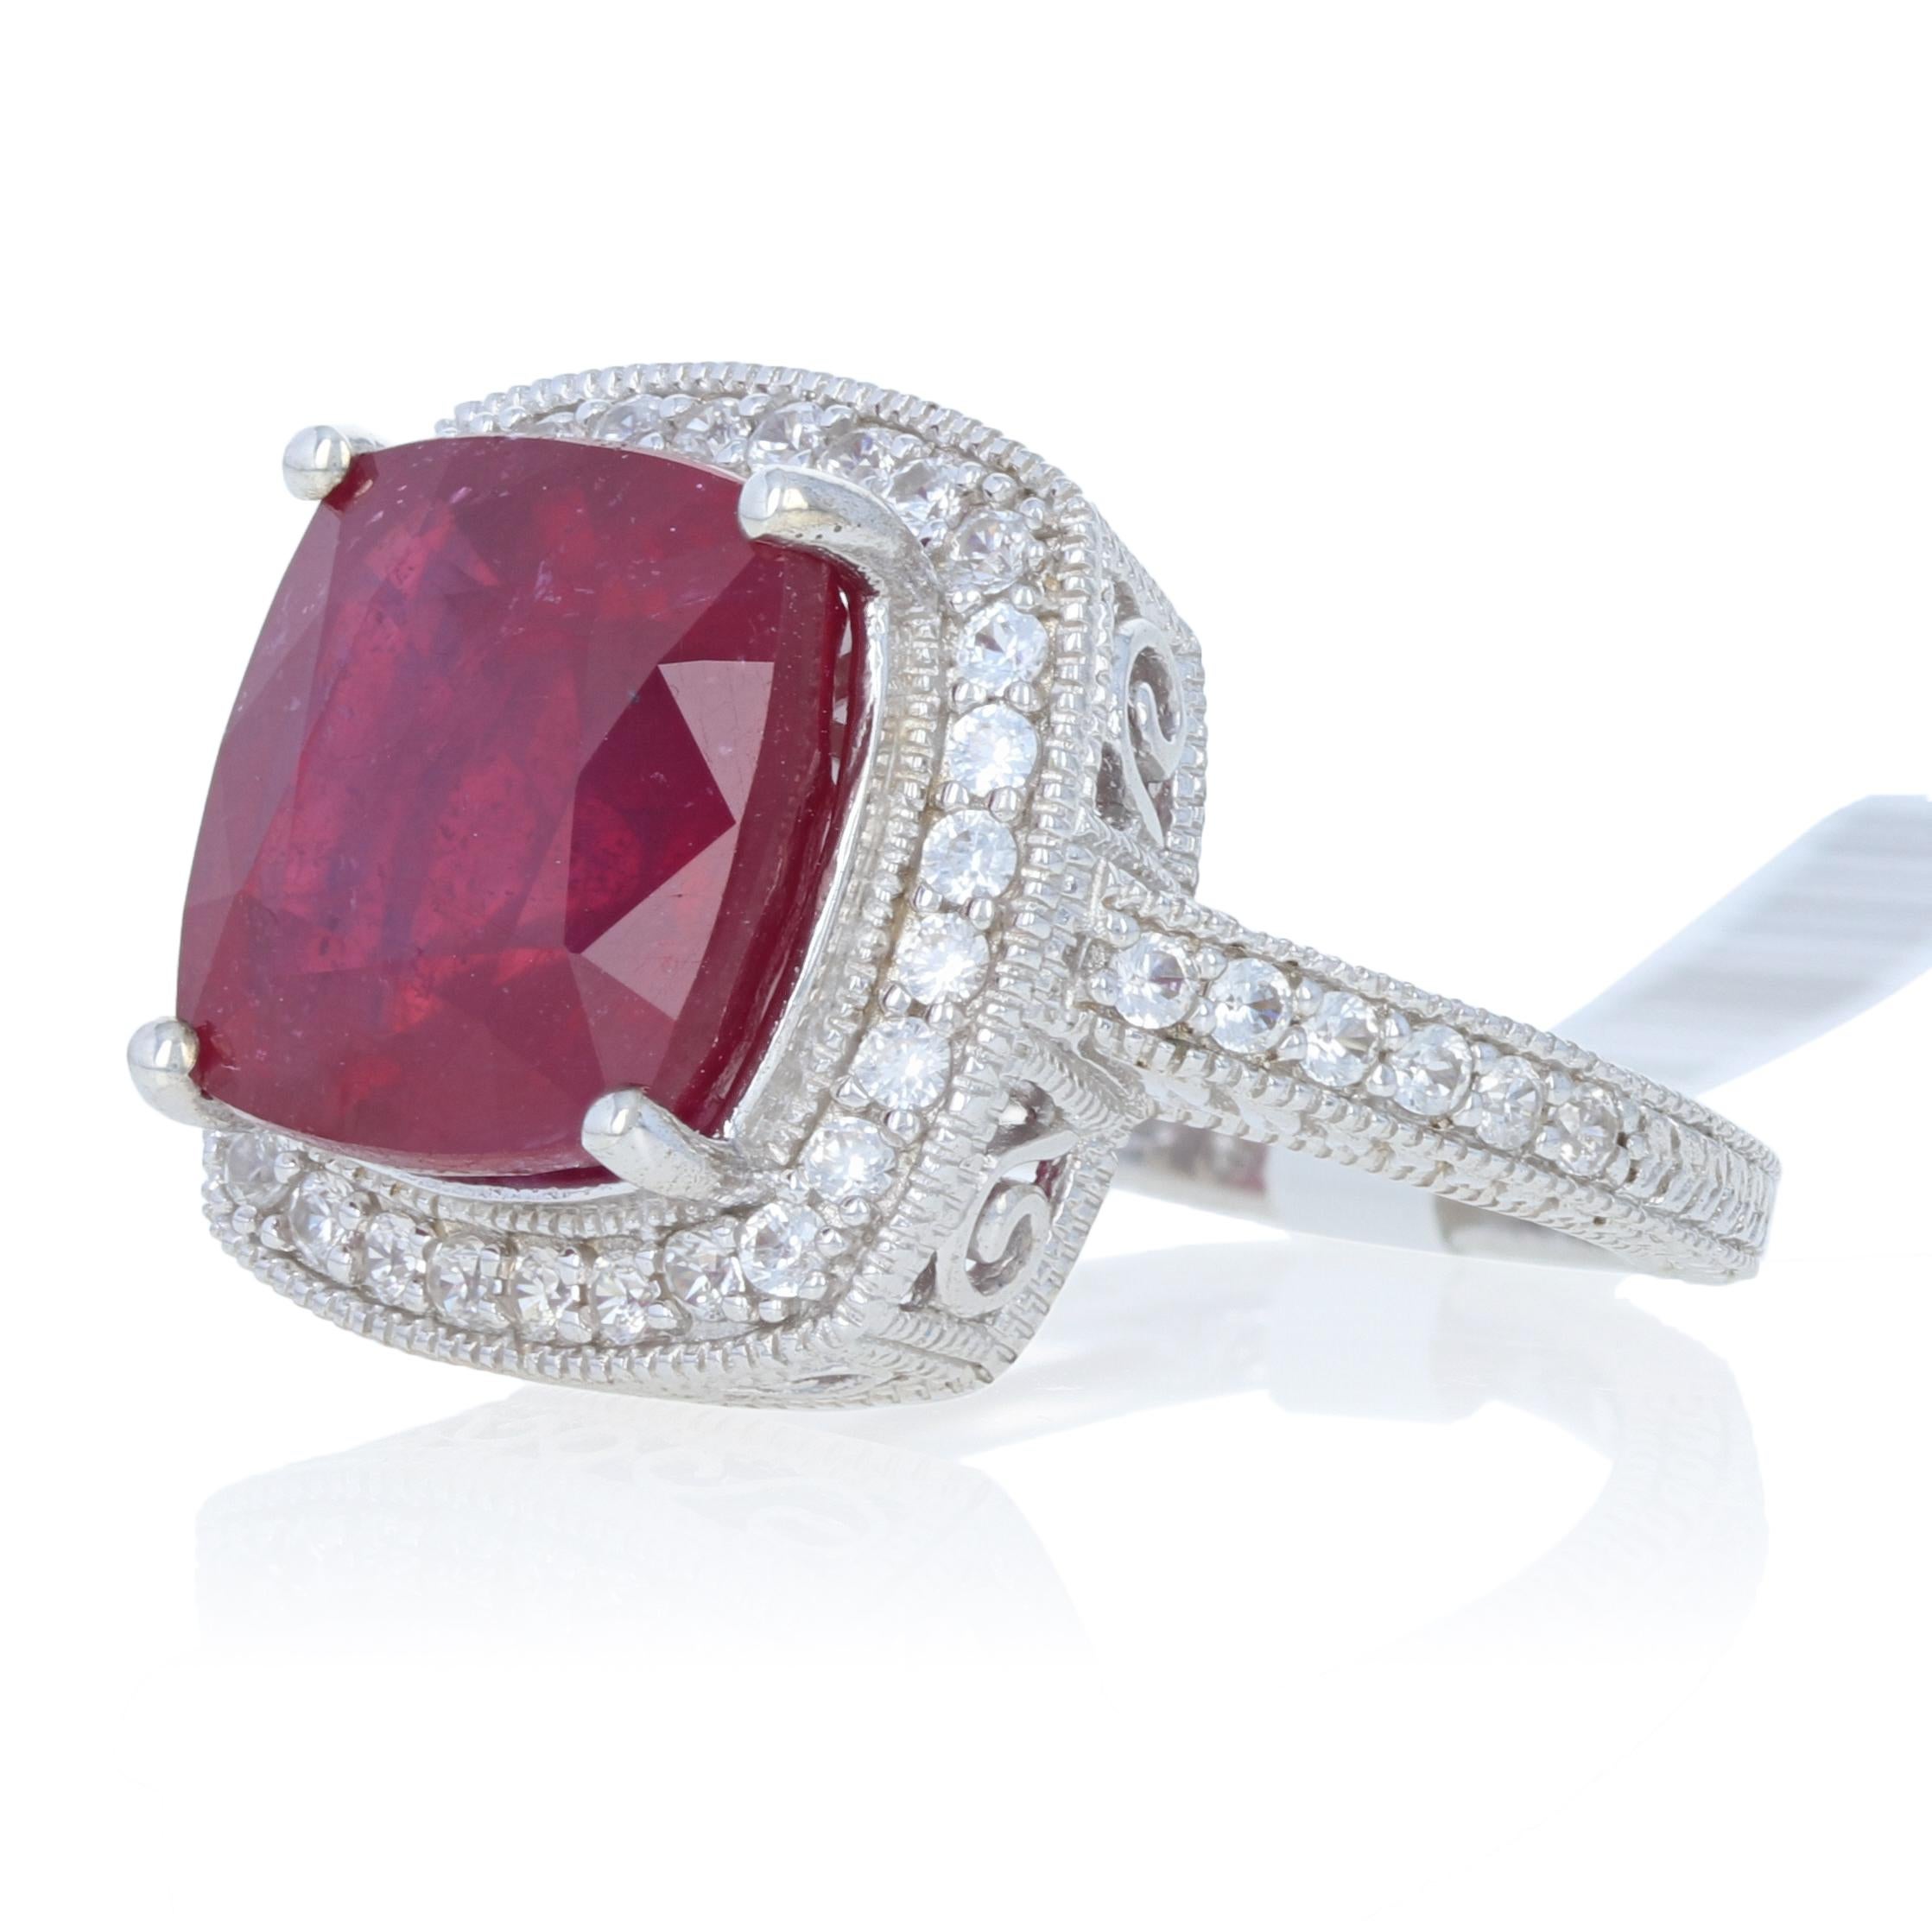 Size: 6 1/4 - 6 1/2
Sizing Fee: Up 1 size for $20

Metal Content: Guaranteed Sterling Silver as stamped

Stone Information: 
Genuine Ruby
Treatments: Heated & Lead Glass Filled
Color: Red
Size: 12.1mm Square
Carat(s): 9.50ct

Genuine Zircons
Color: